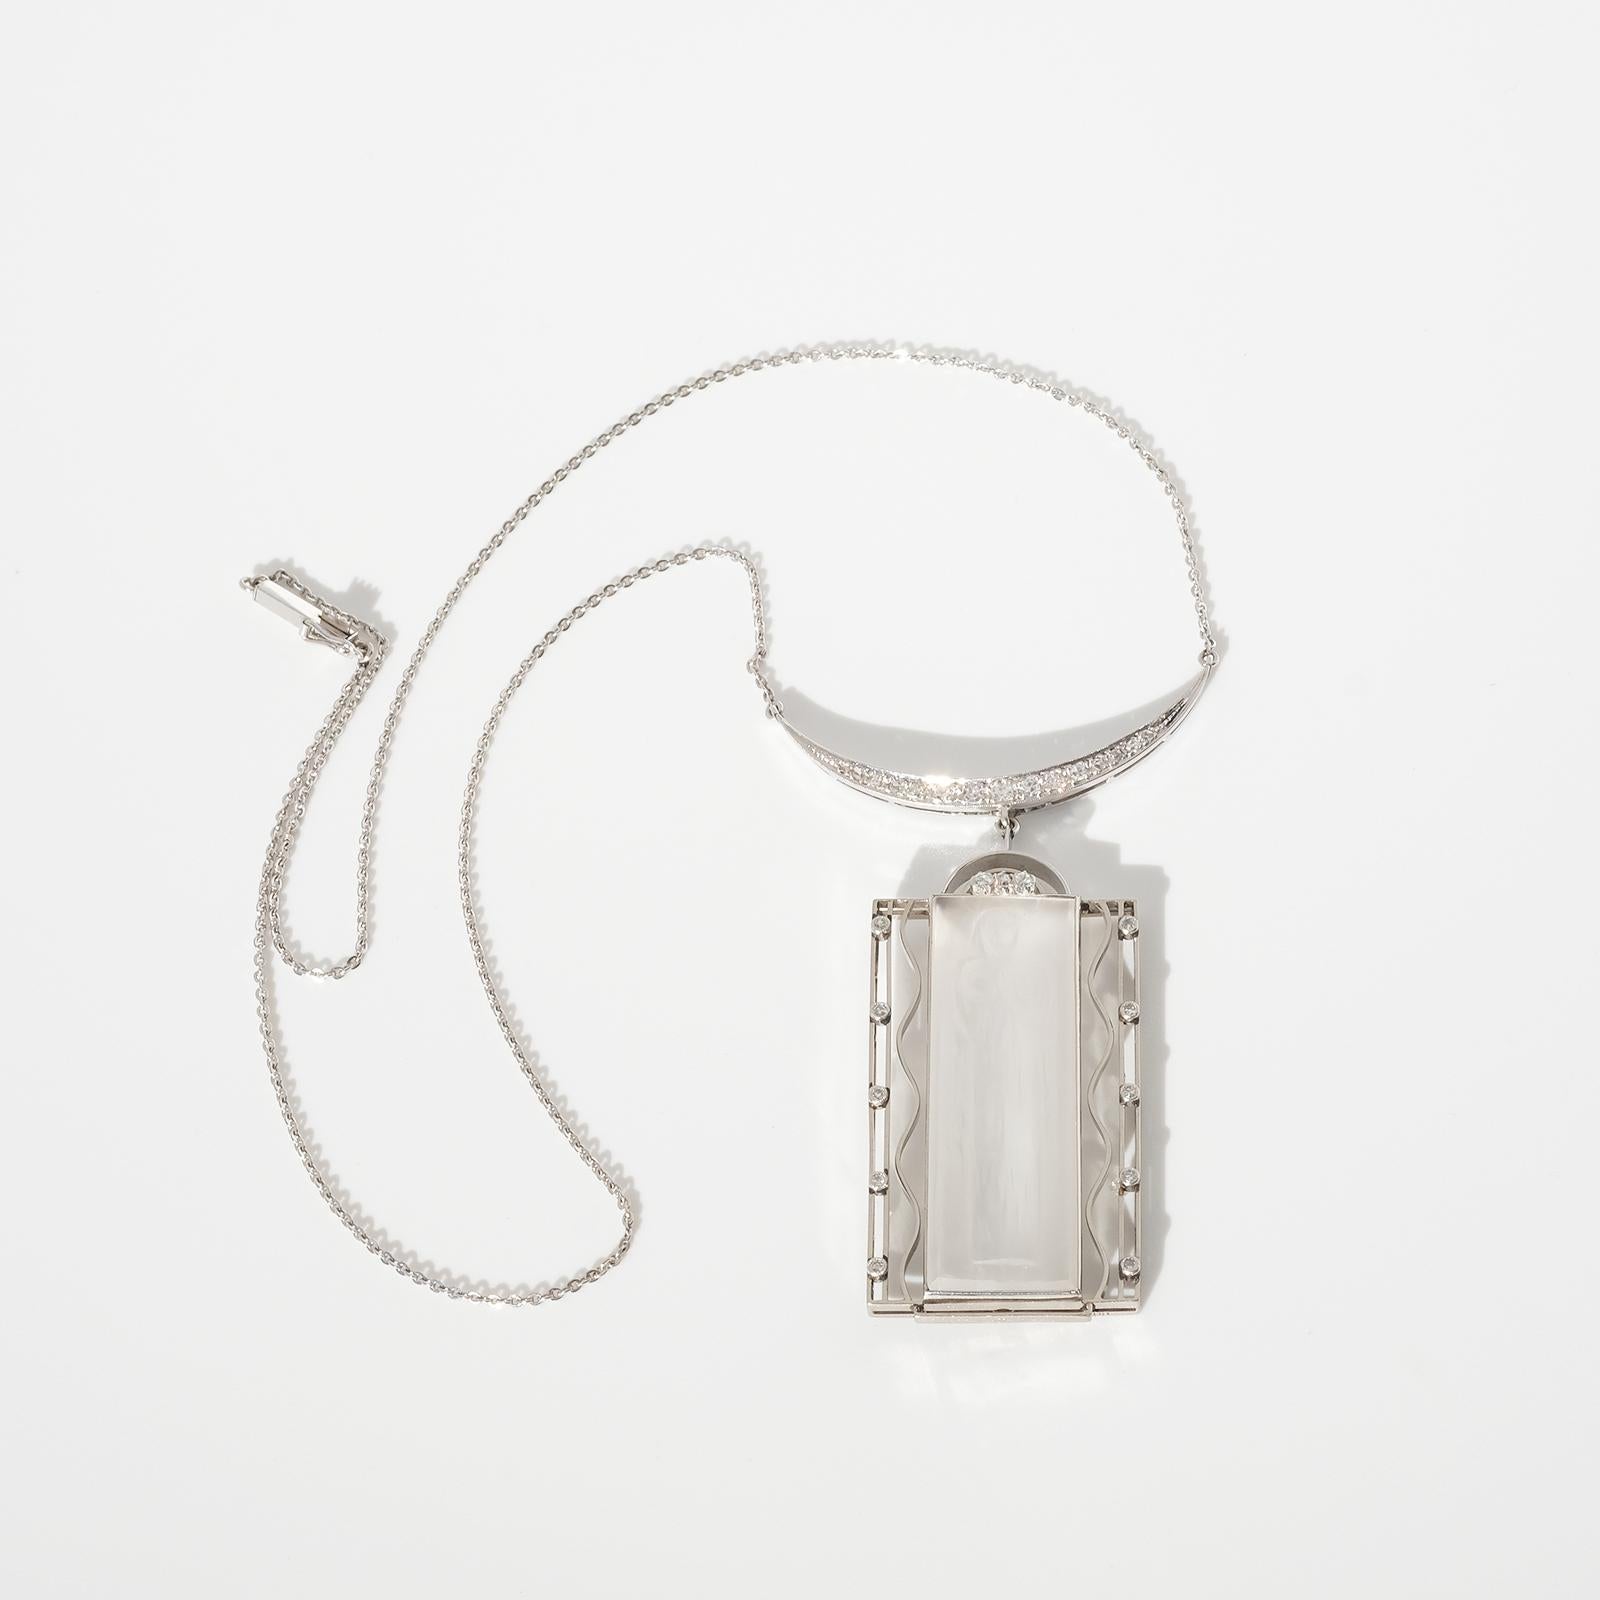 This necklace and pendant are made out of 18 karat white gold, 28 diamonds and rock crystal. Engraved in the rock crystal is an image of the Italian saint Saint Lucia.

Did you know that this shimmering necklace, referred to as the Lucia jewelry,